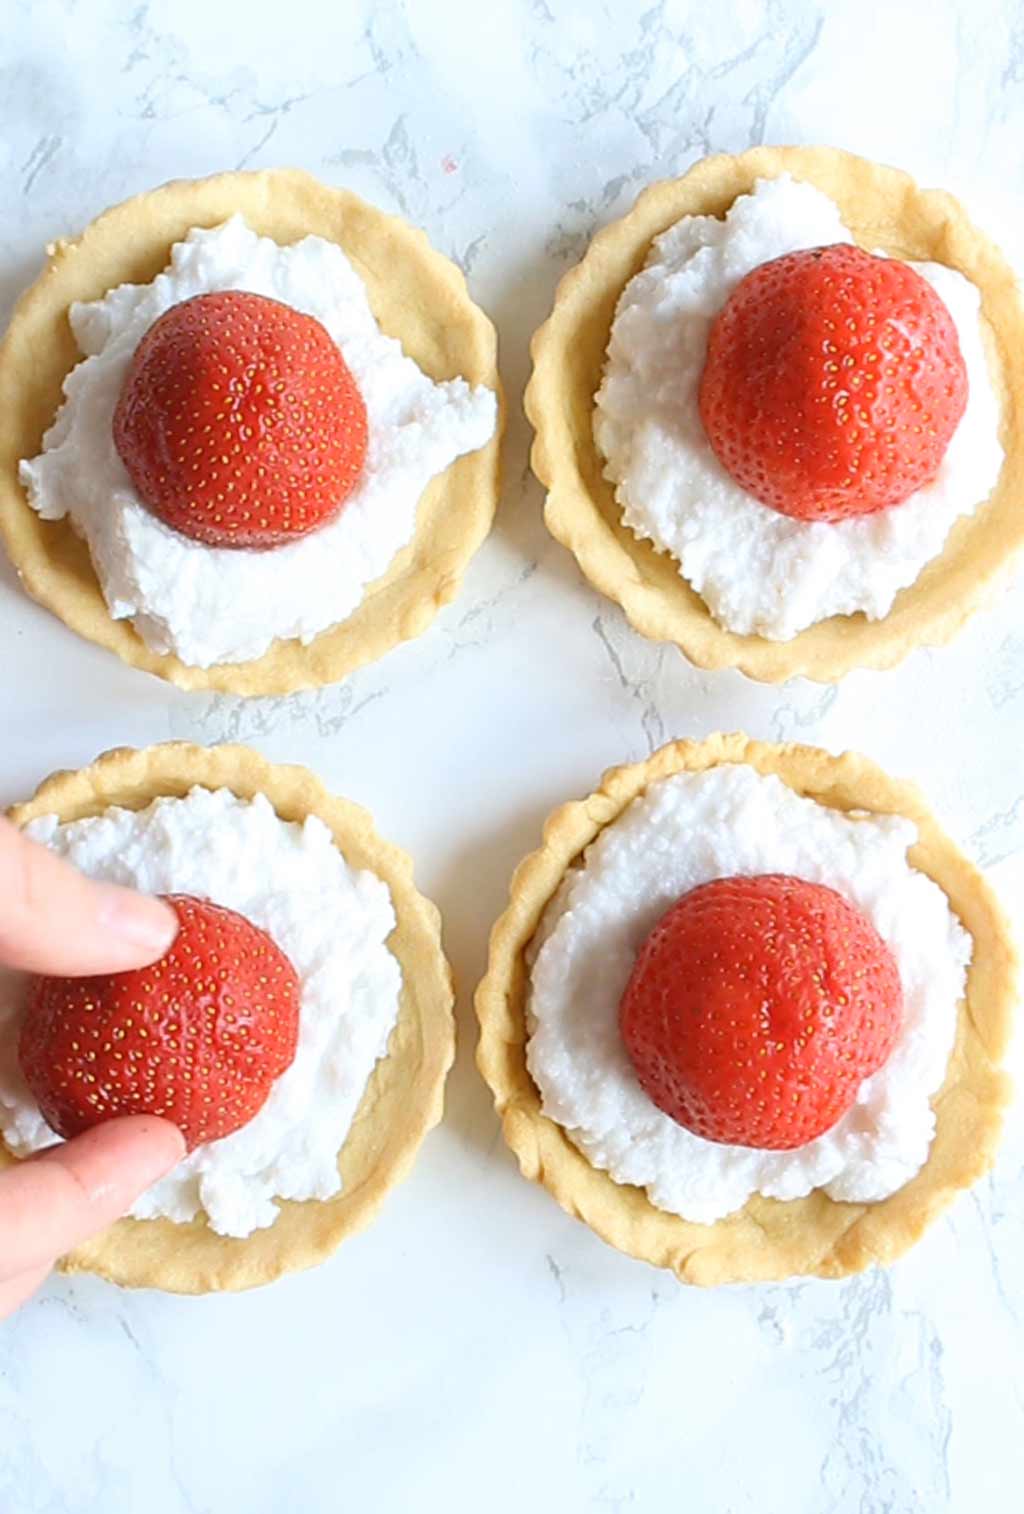 placing a strawberry on top of the cream on the tart